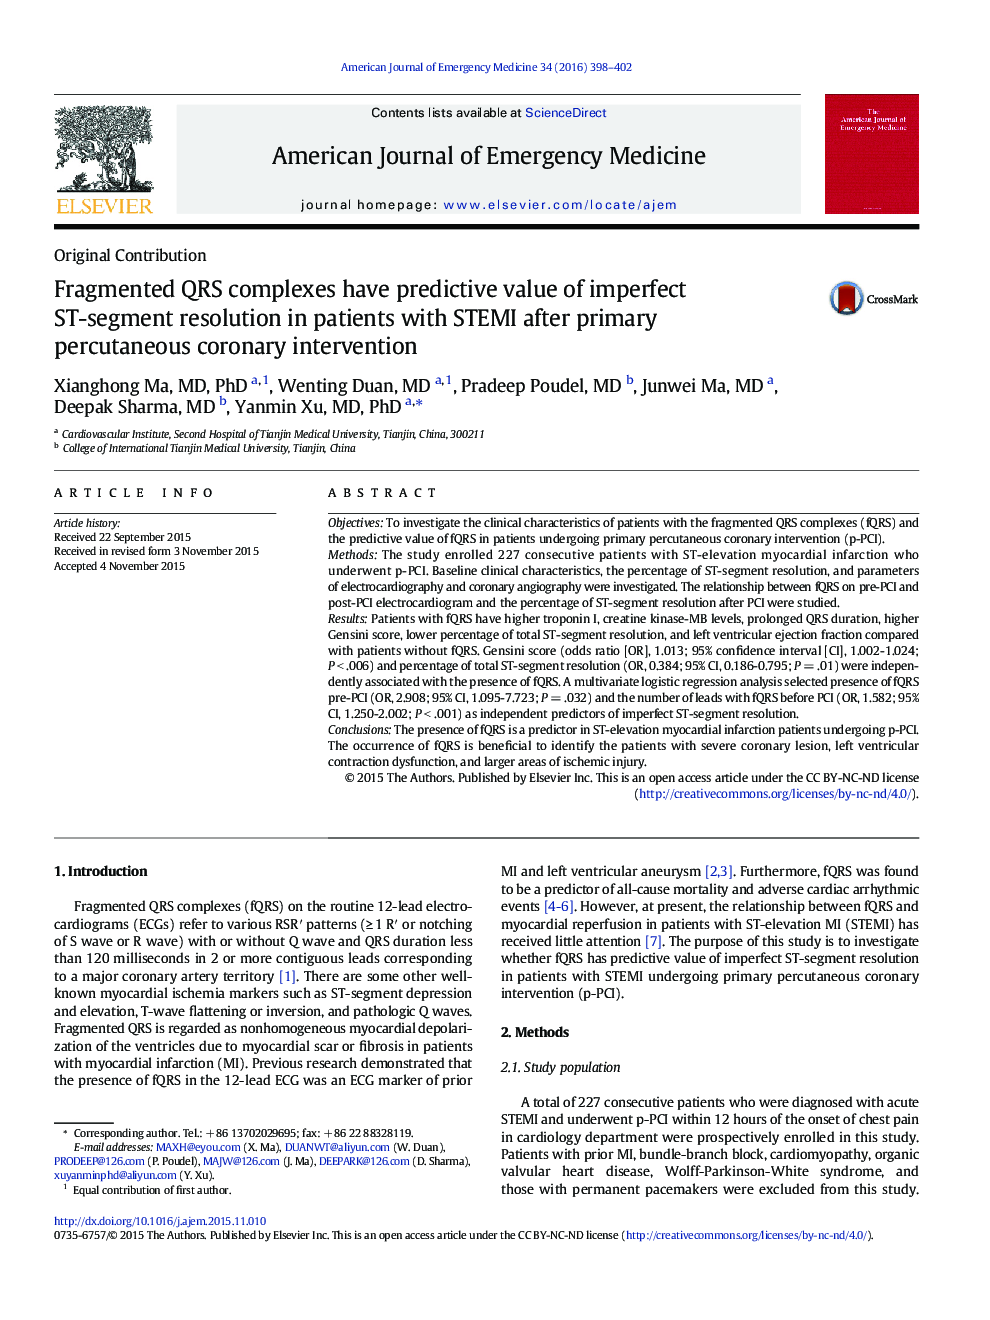 Original ContributionFragmented QRS complexes have predictive value of imperfect ST-segment resolution in patients with STEMI after primary percutaneous coronary intervention